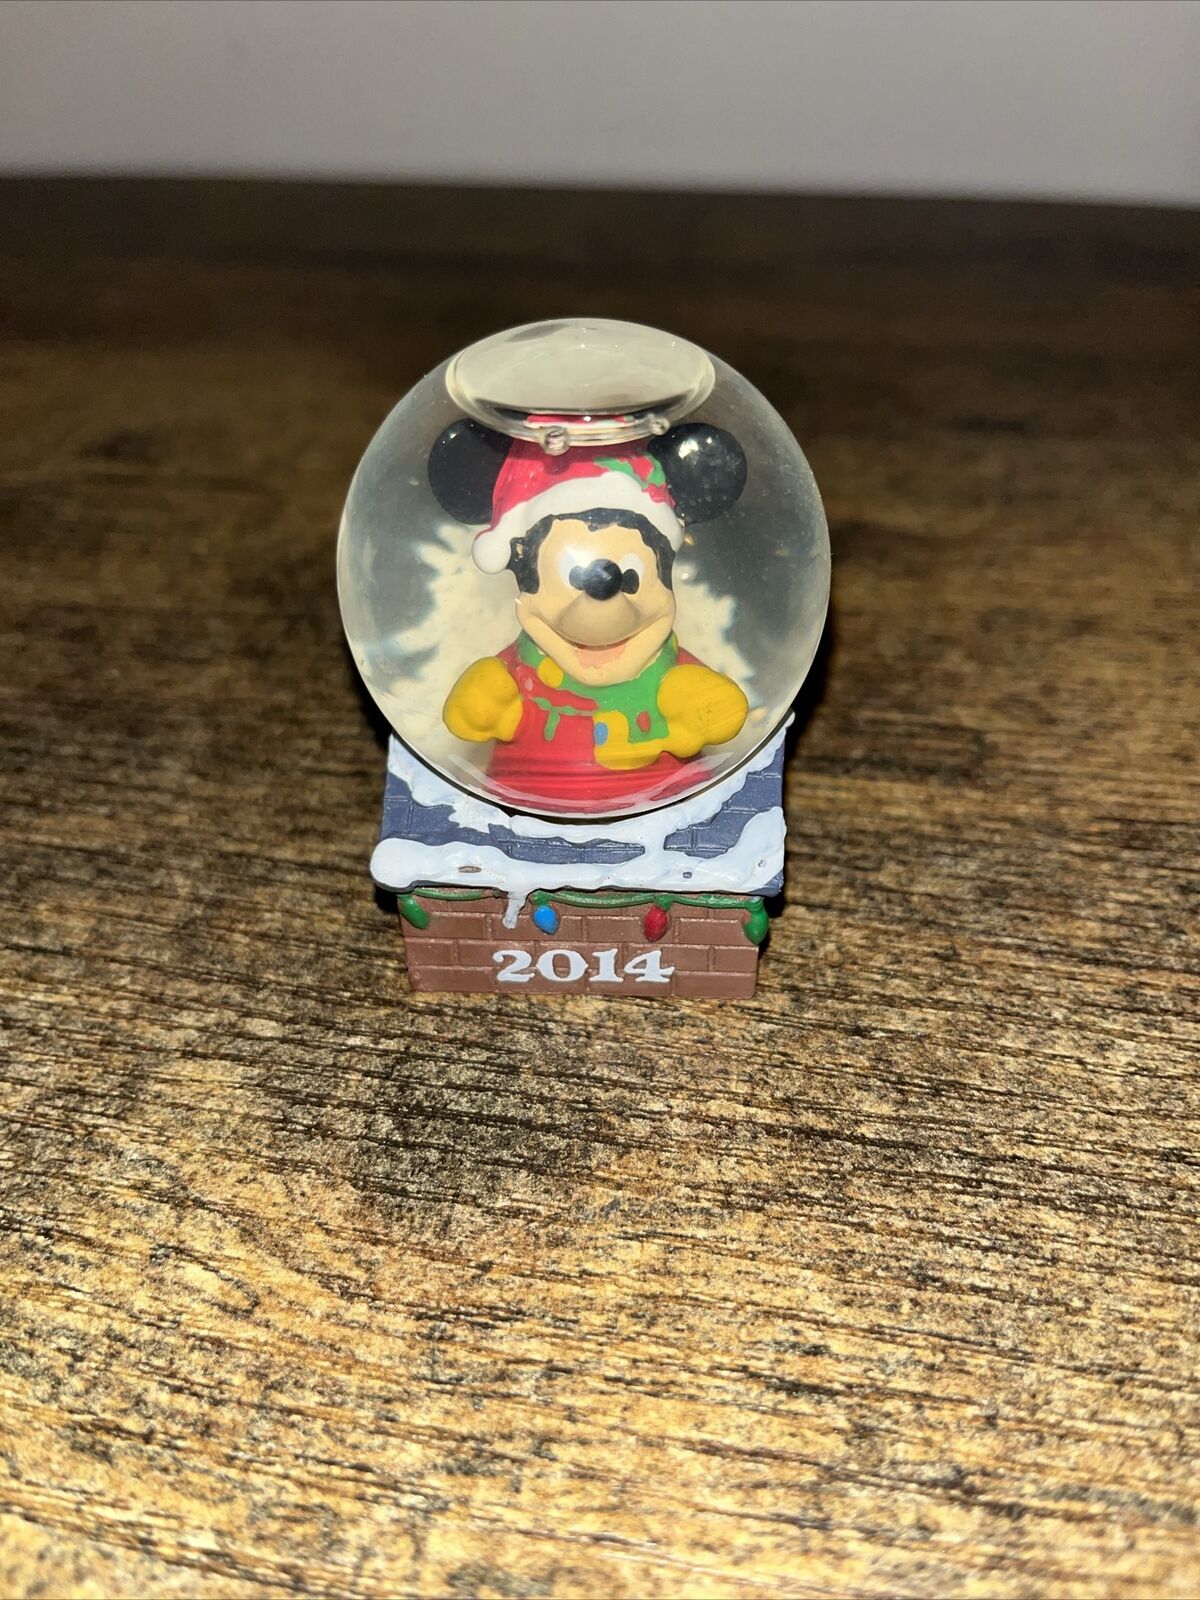 2014 JC Penny Exclusive Disney Collectable Mickey Mouse Snow Globe - New in box